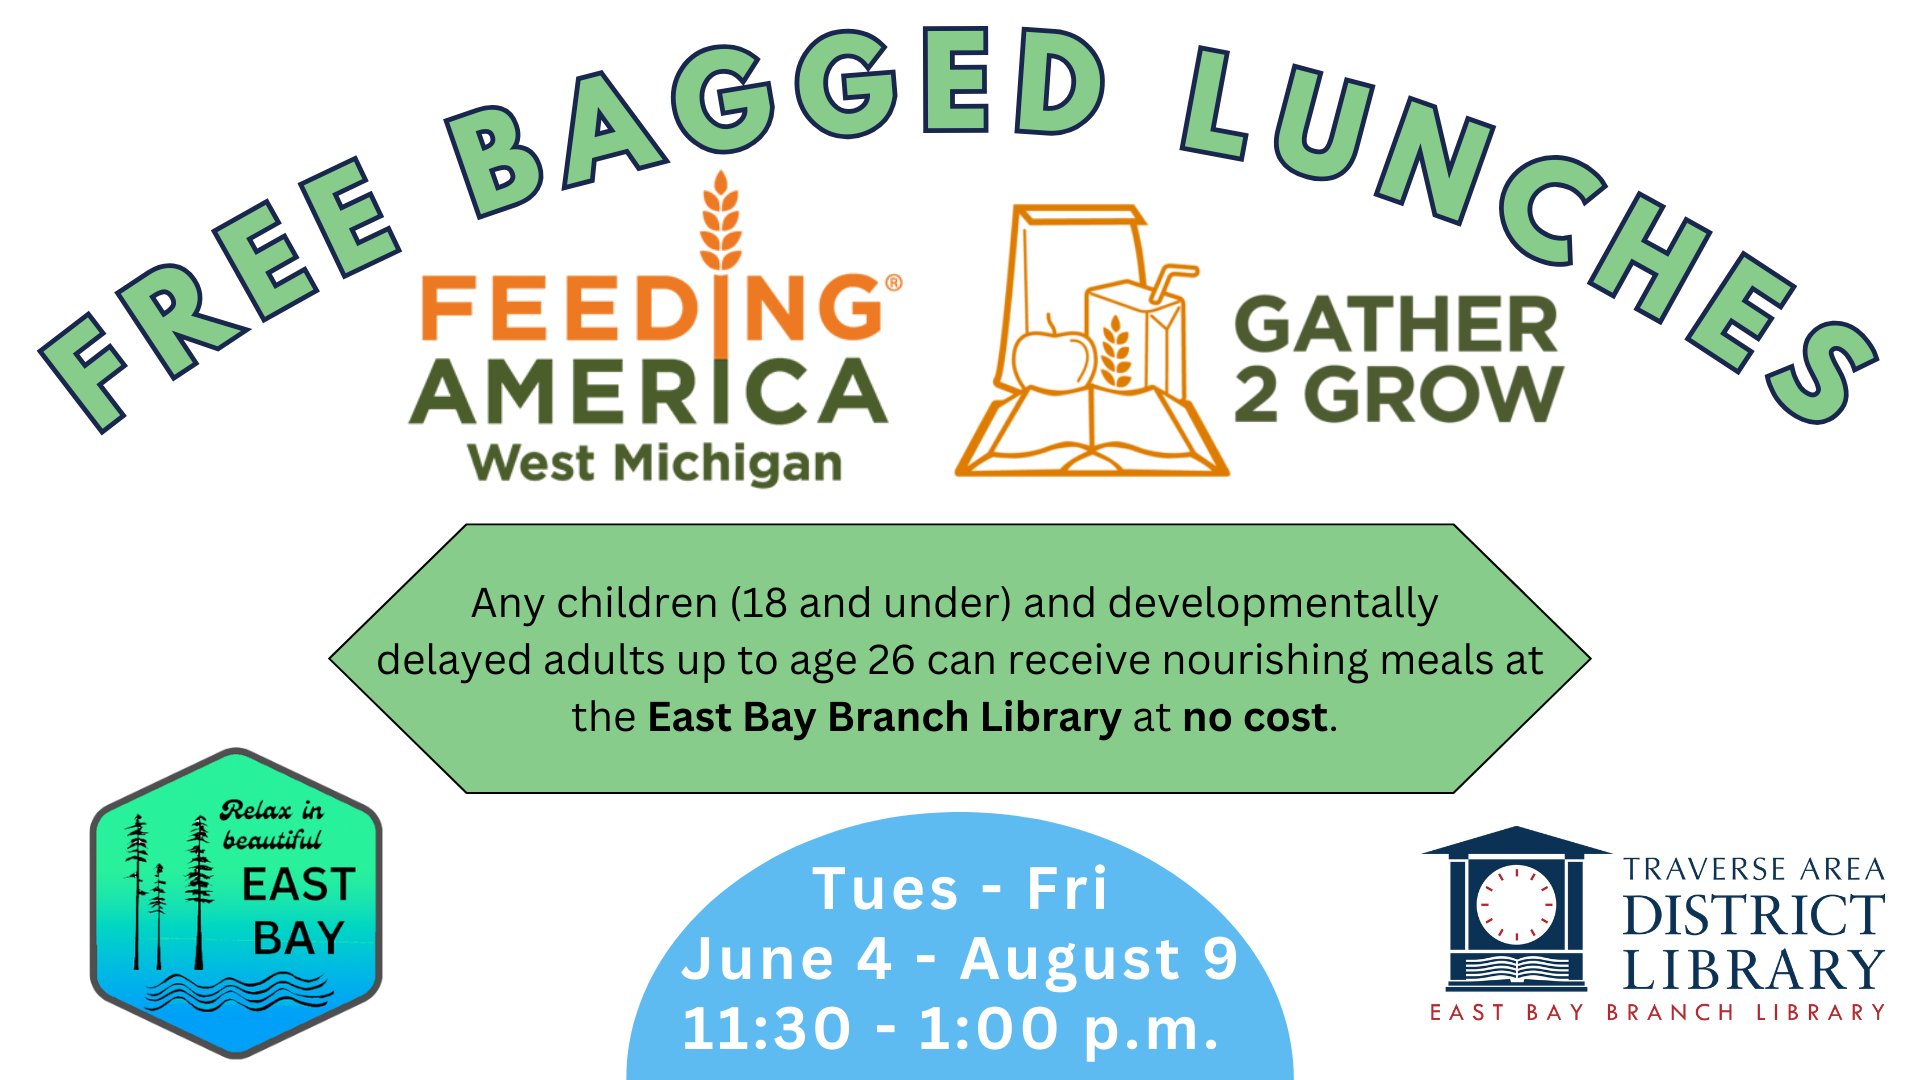 Image of the Gather 2 Grow icon, which is an open book, a brown sack bag, an apple, and a juice box with a straw, outlined in the color orange. Text reads "free bagged lunches" from Feeding America, June 4 to August 9.